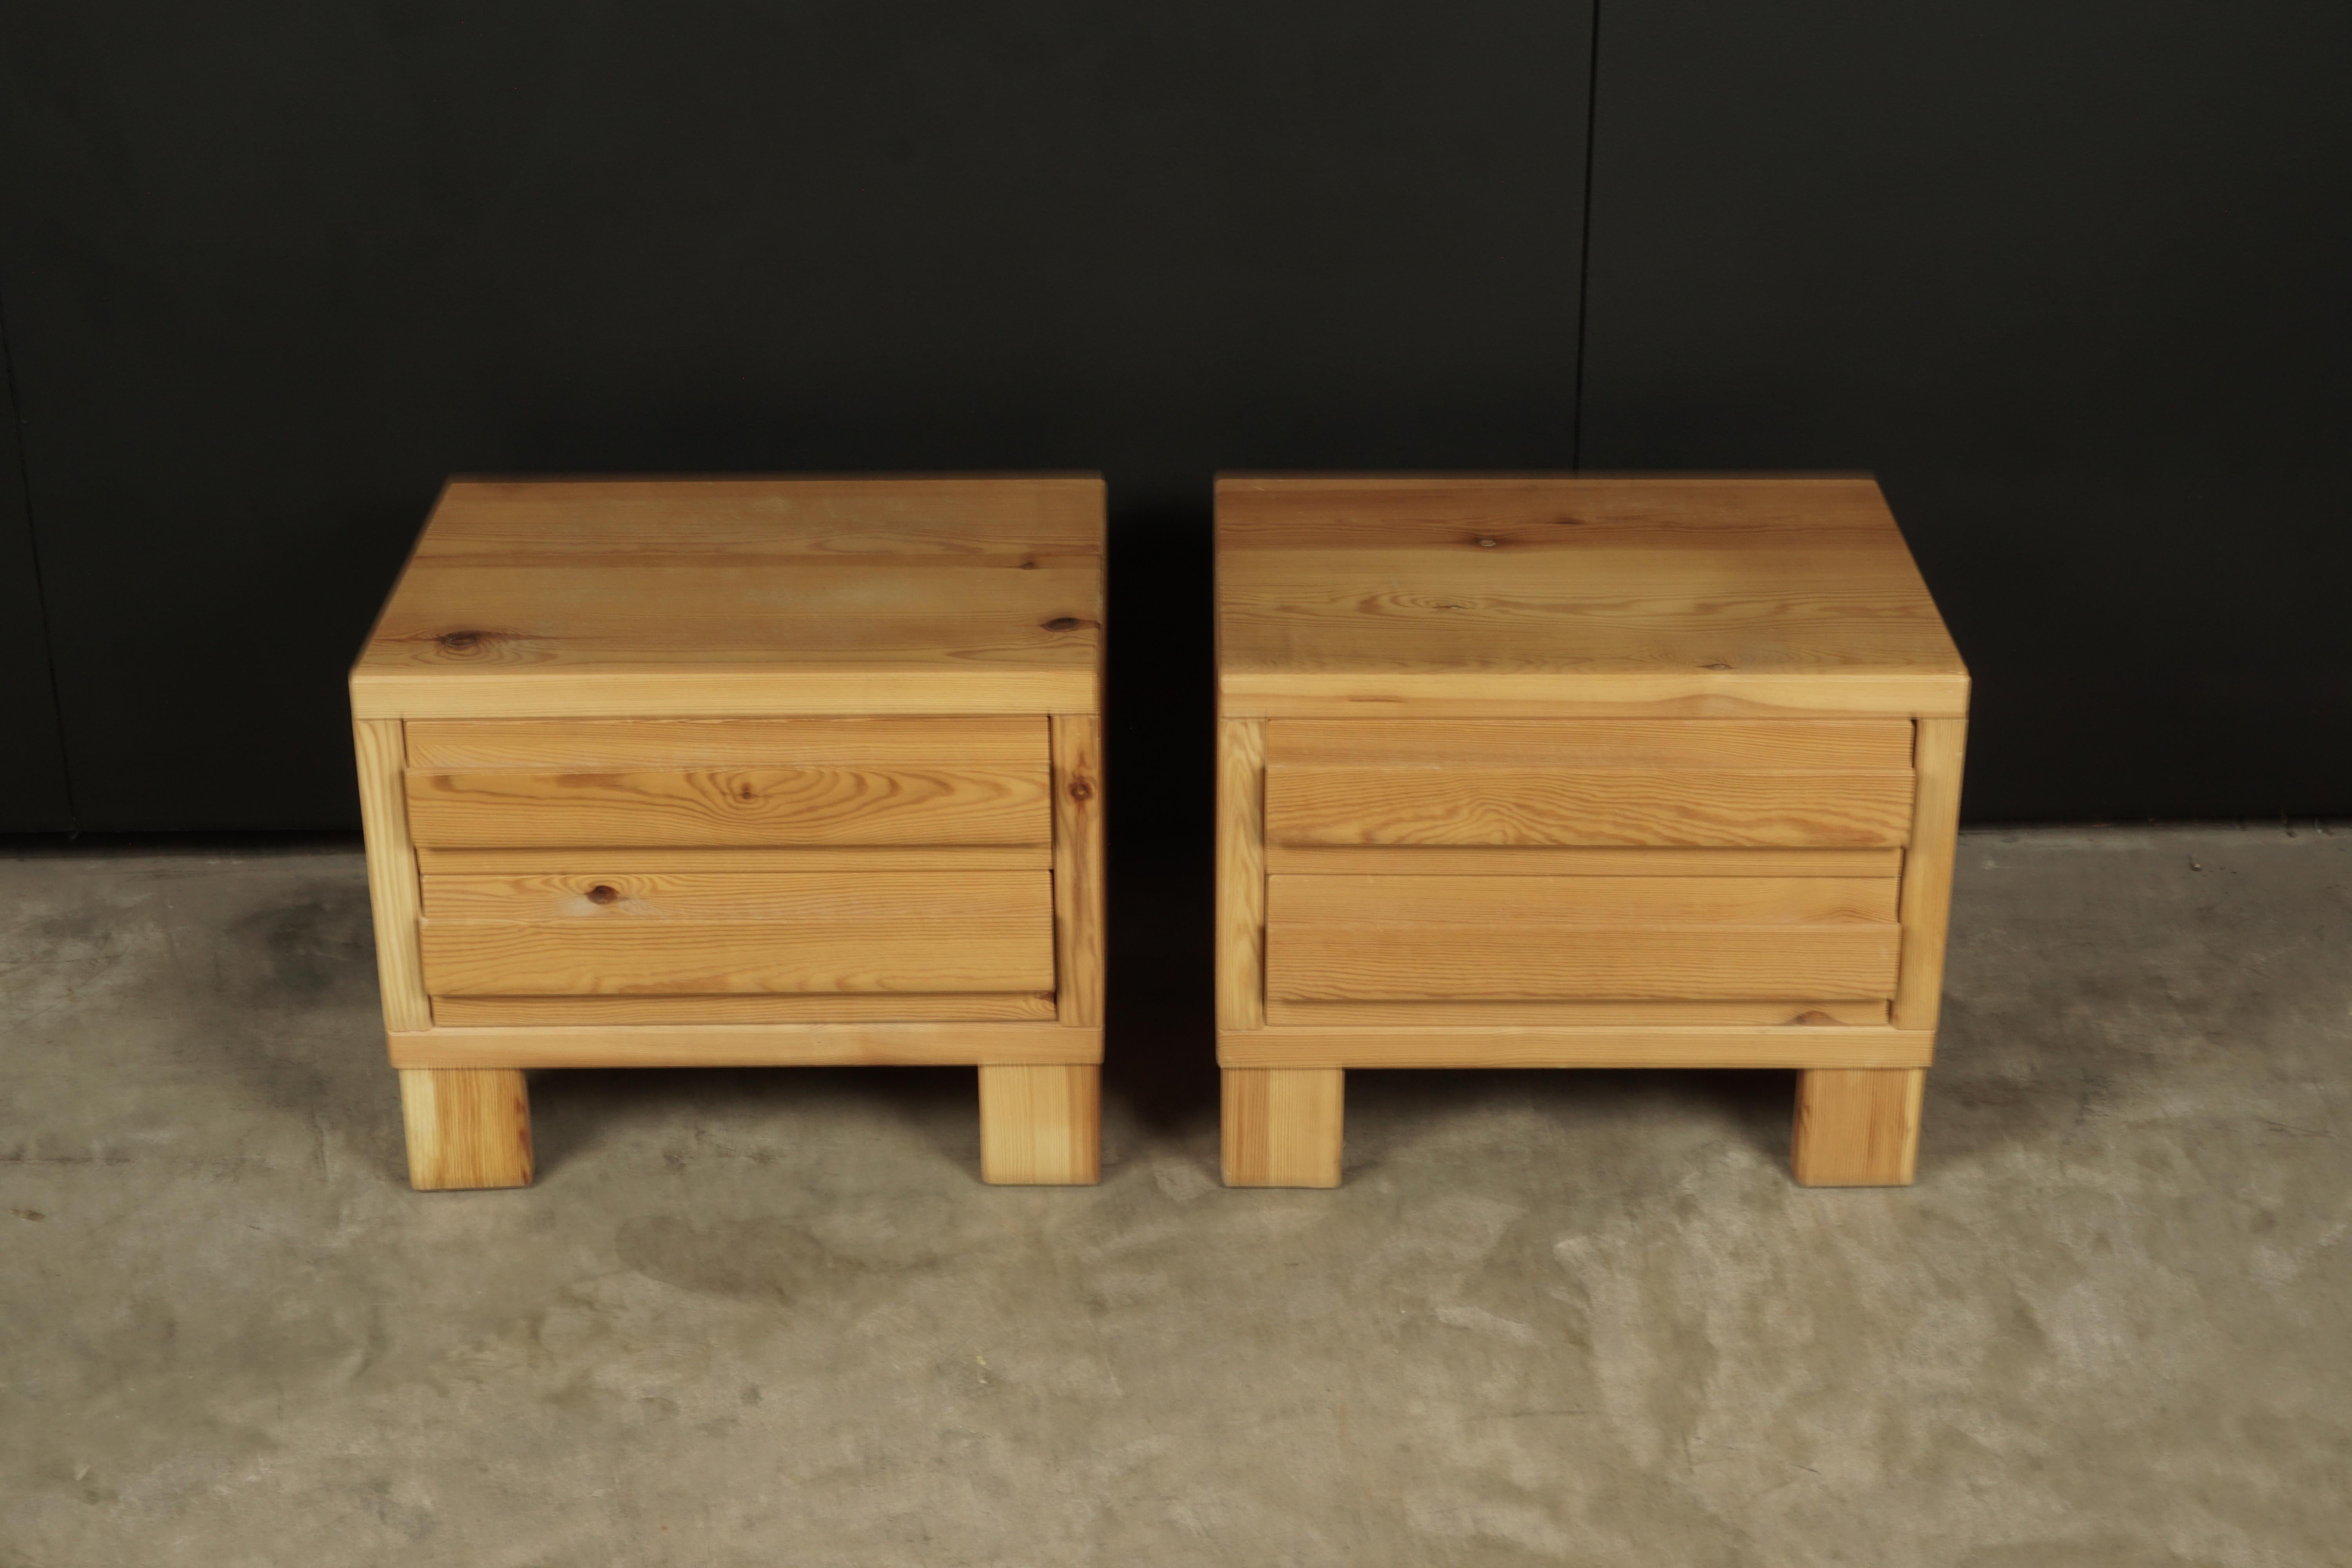 Vintage pair of pine nightstands from Sweden, 1960s. Solid pine construction with light patina and wear.